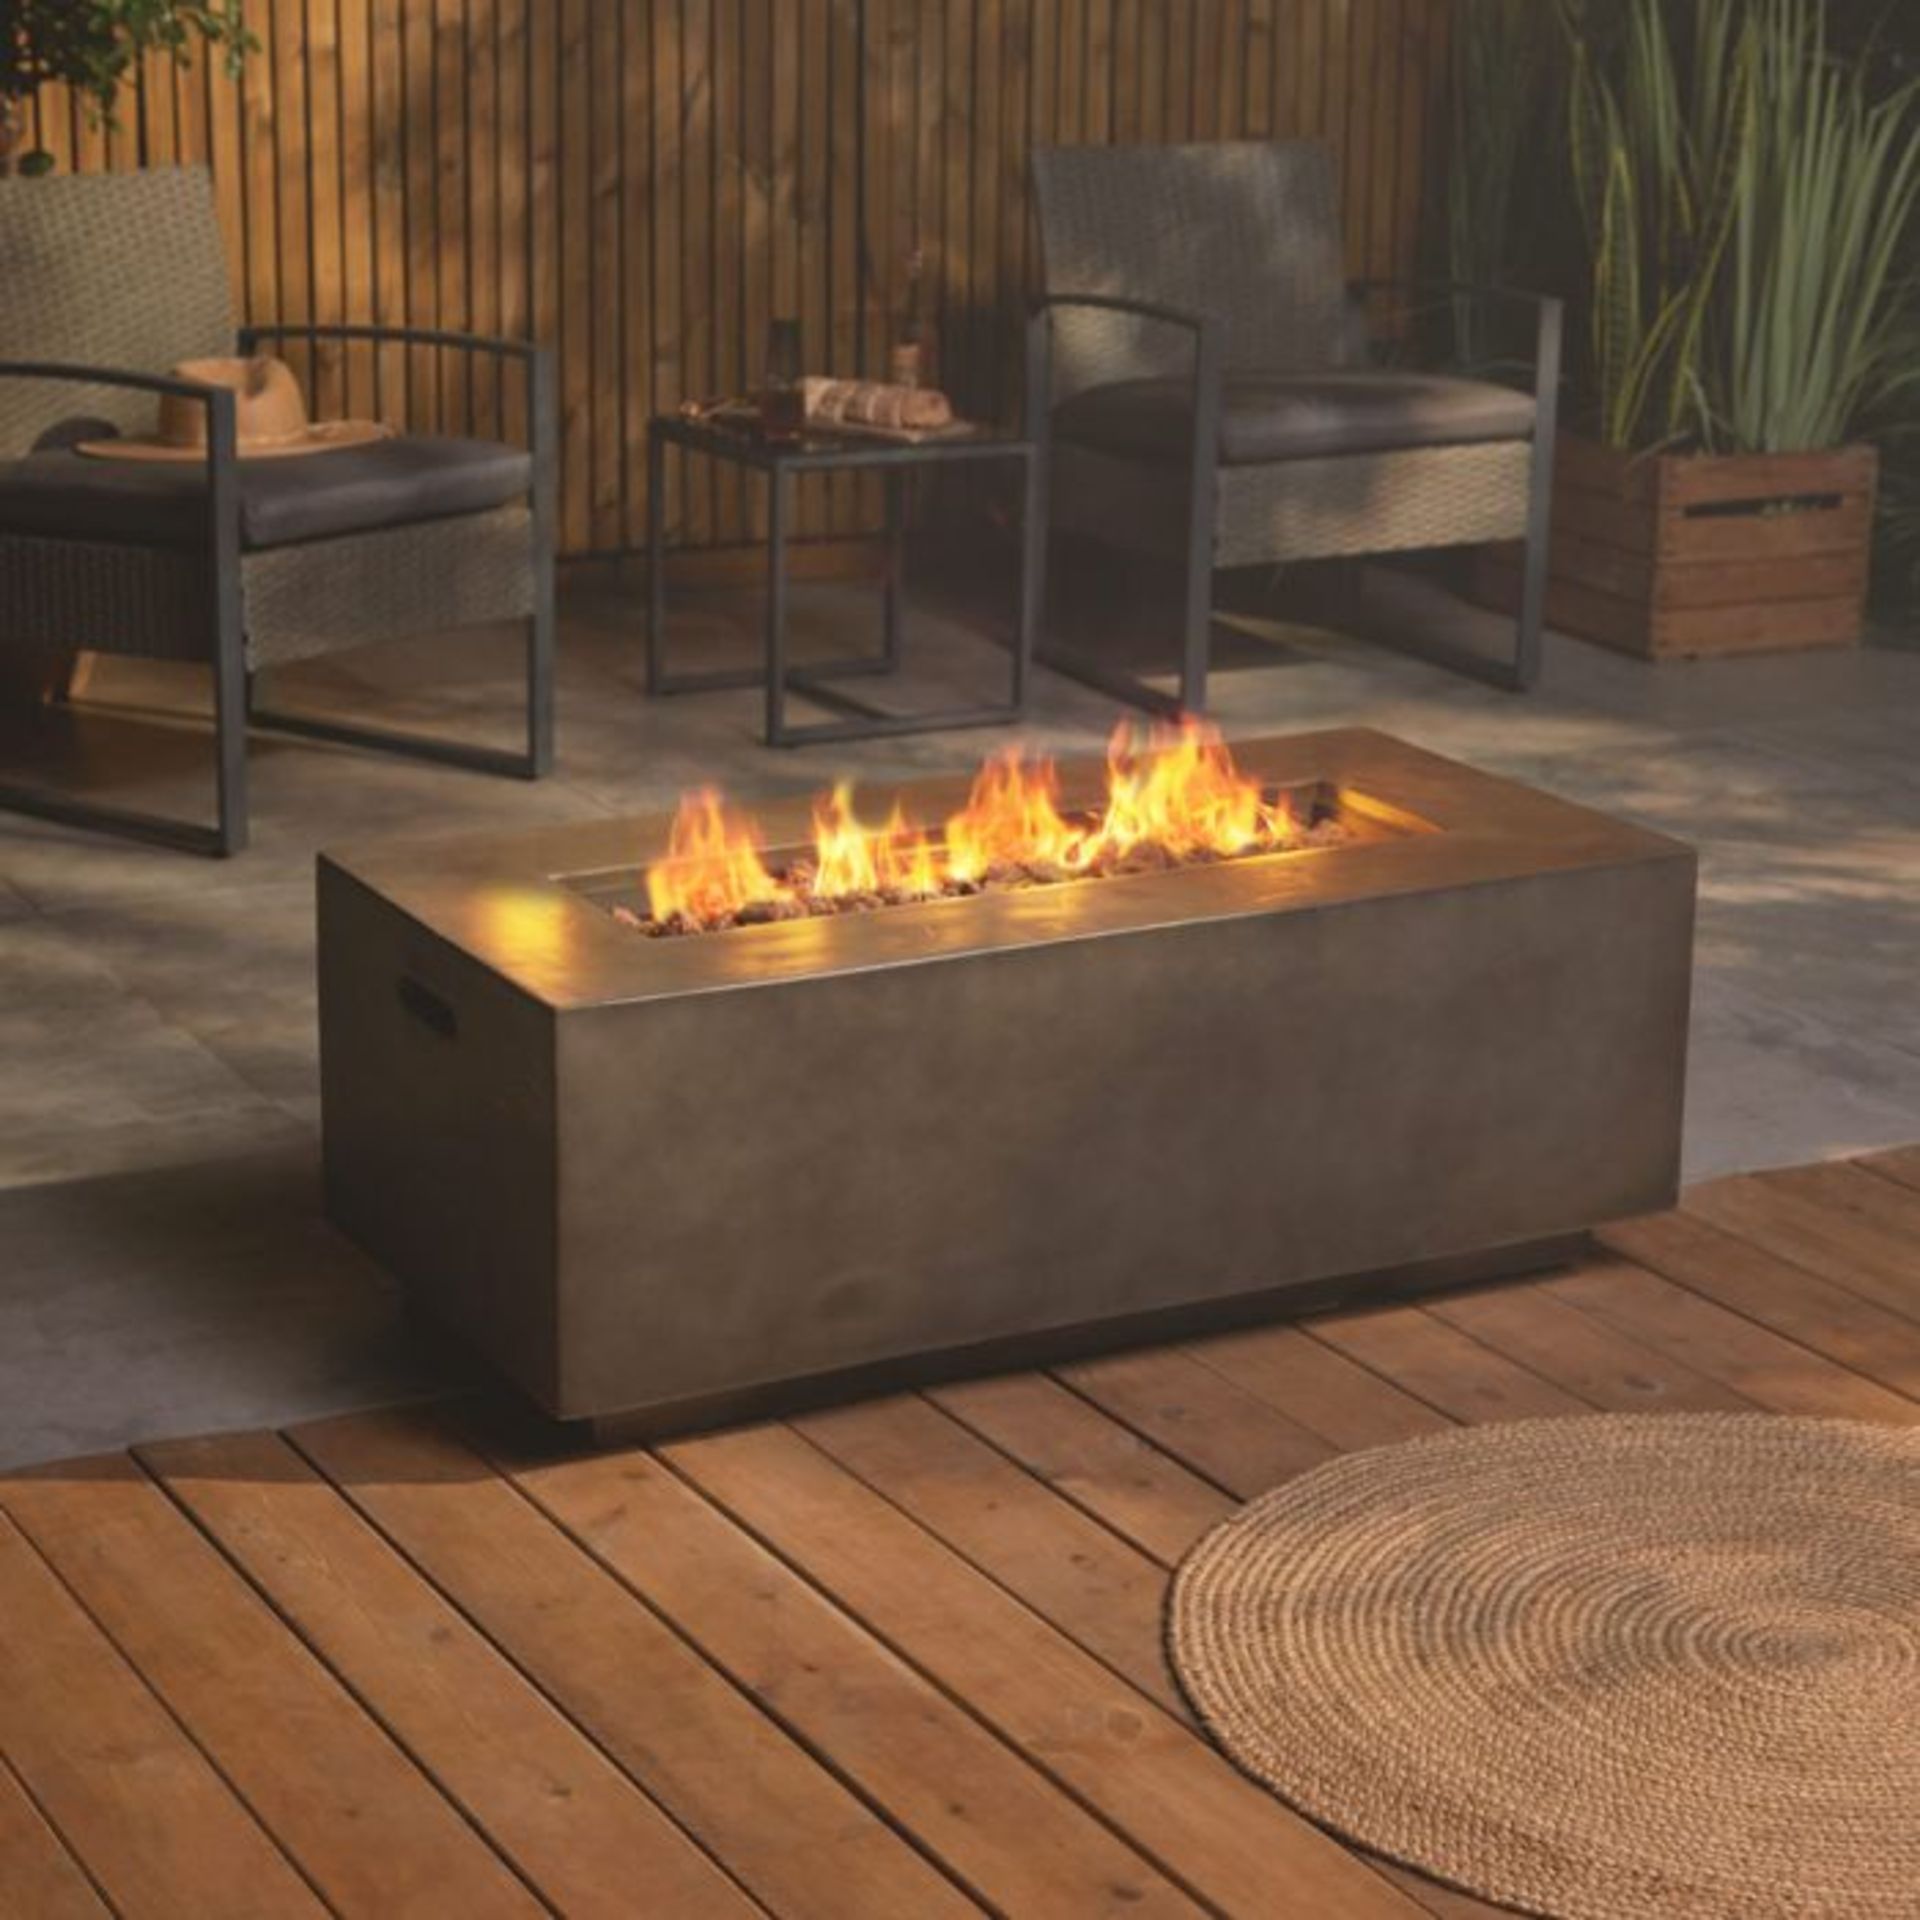 New Boxed - Luxe Rectangle Gas Fire Pit. .Spend nights around the fire with this safe and